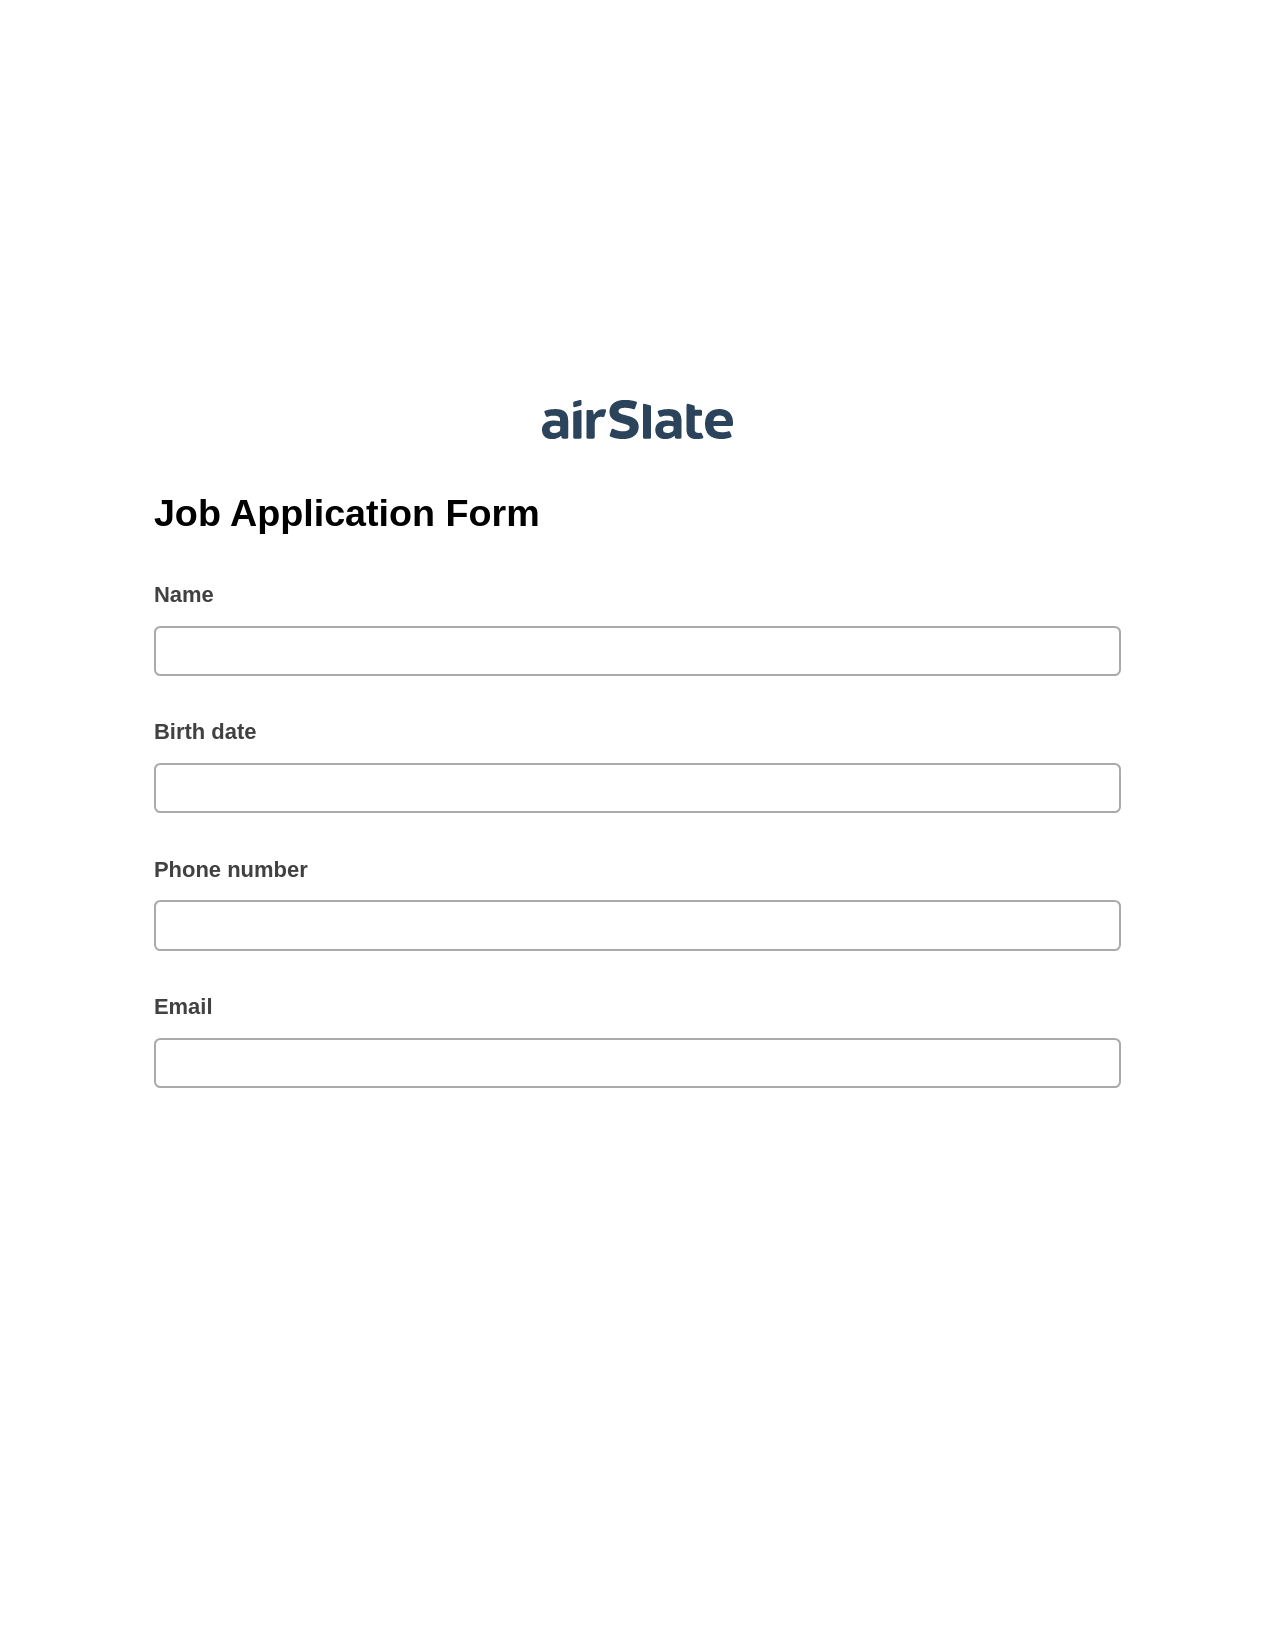 Multirole Job Application Form Pre-fill from Excel Spreadsheet Dropdown Options Bot, Send a Slate to Salesforce Contact Bot, Export to Google Sheet Bot